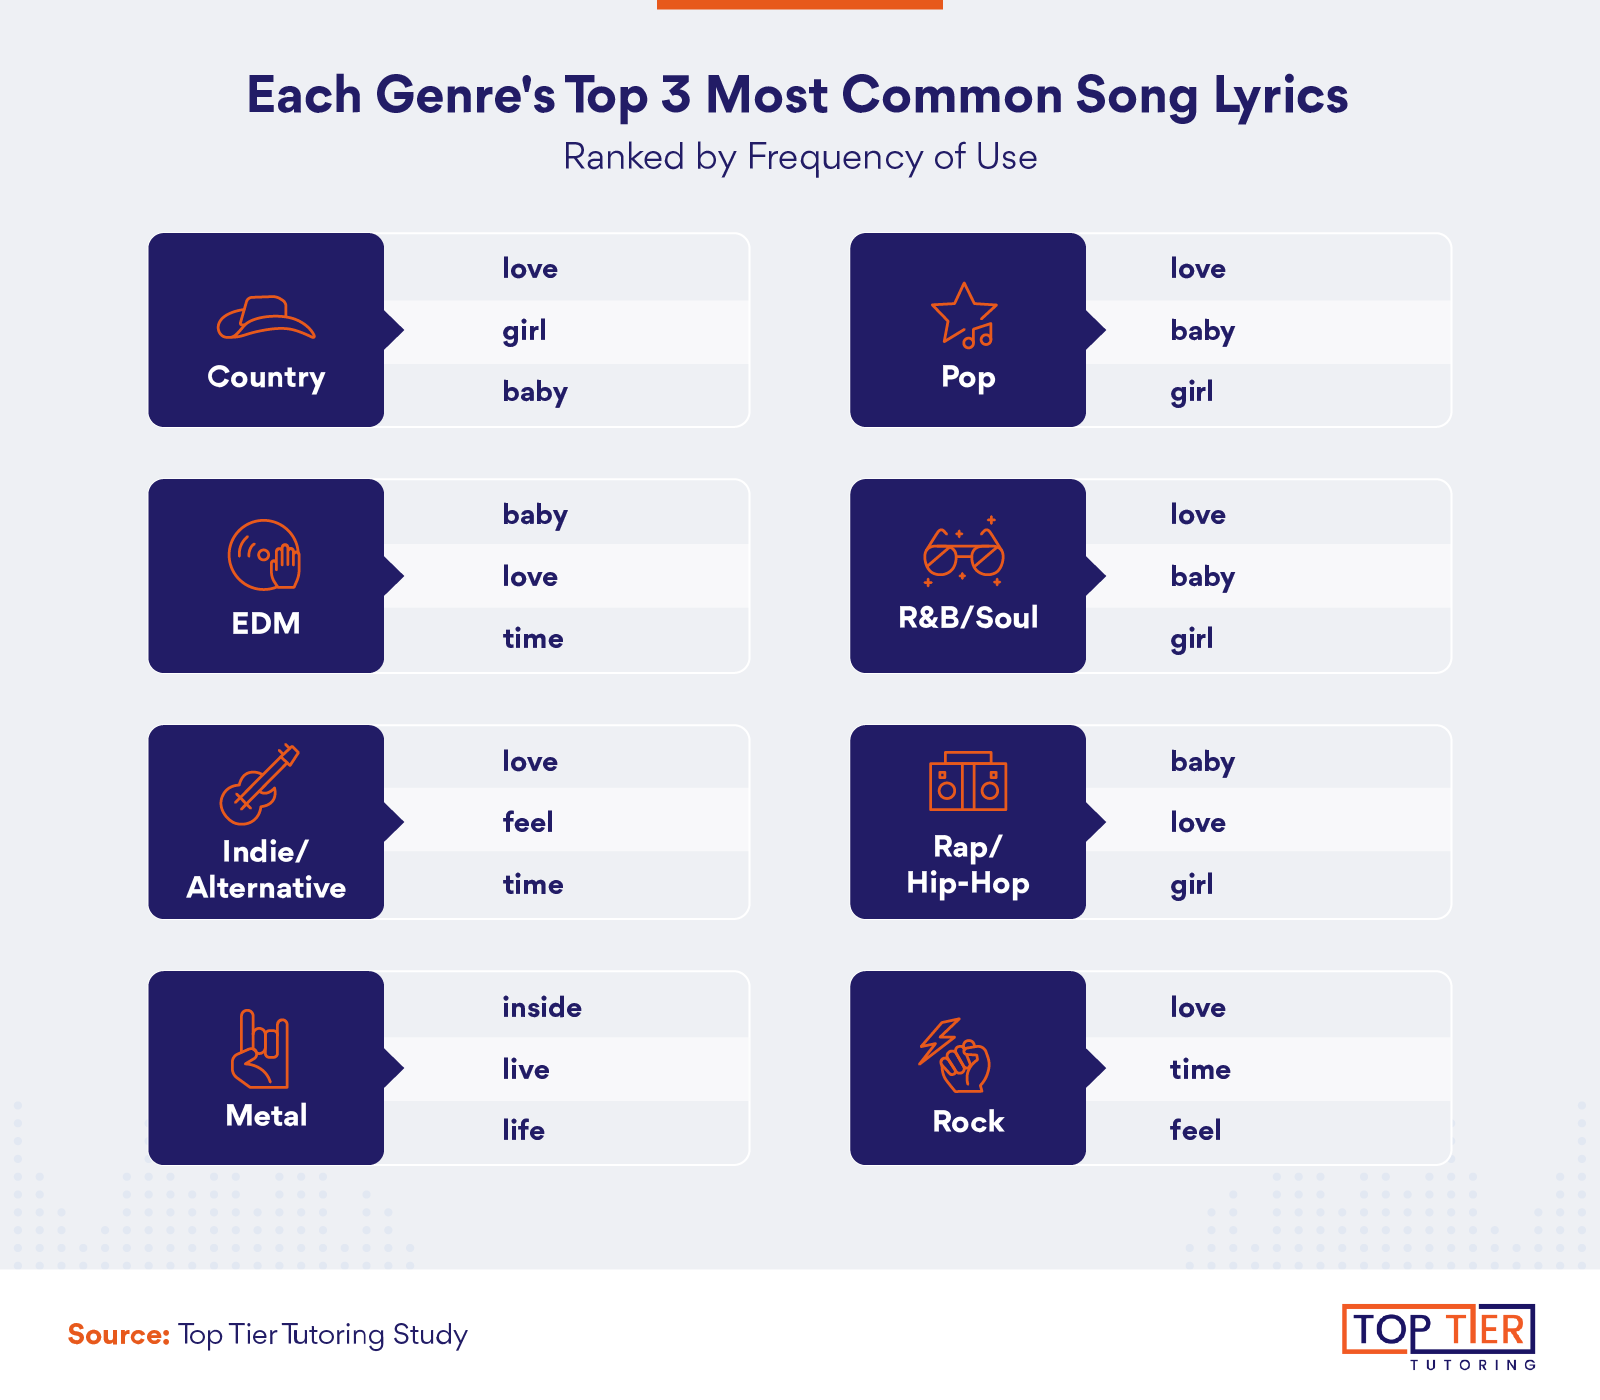 Infographic that explores each genre's top 3 most common song lyrics ranked by frequency of use